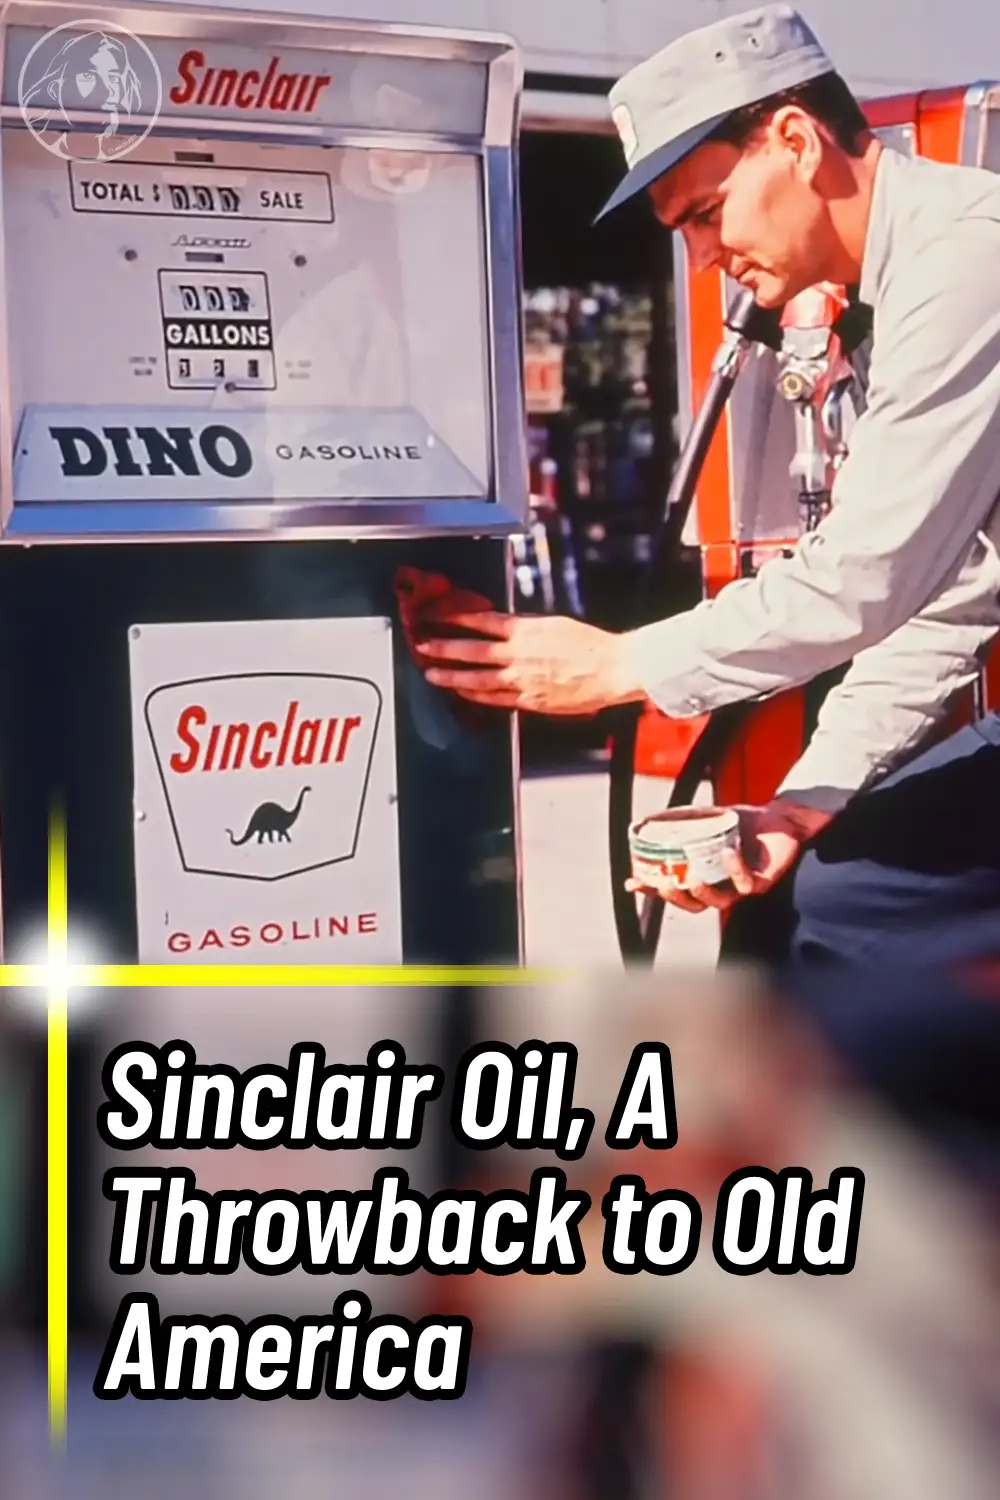 Sinclair Oil, A Throwback to Old America